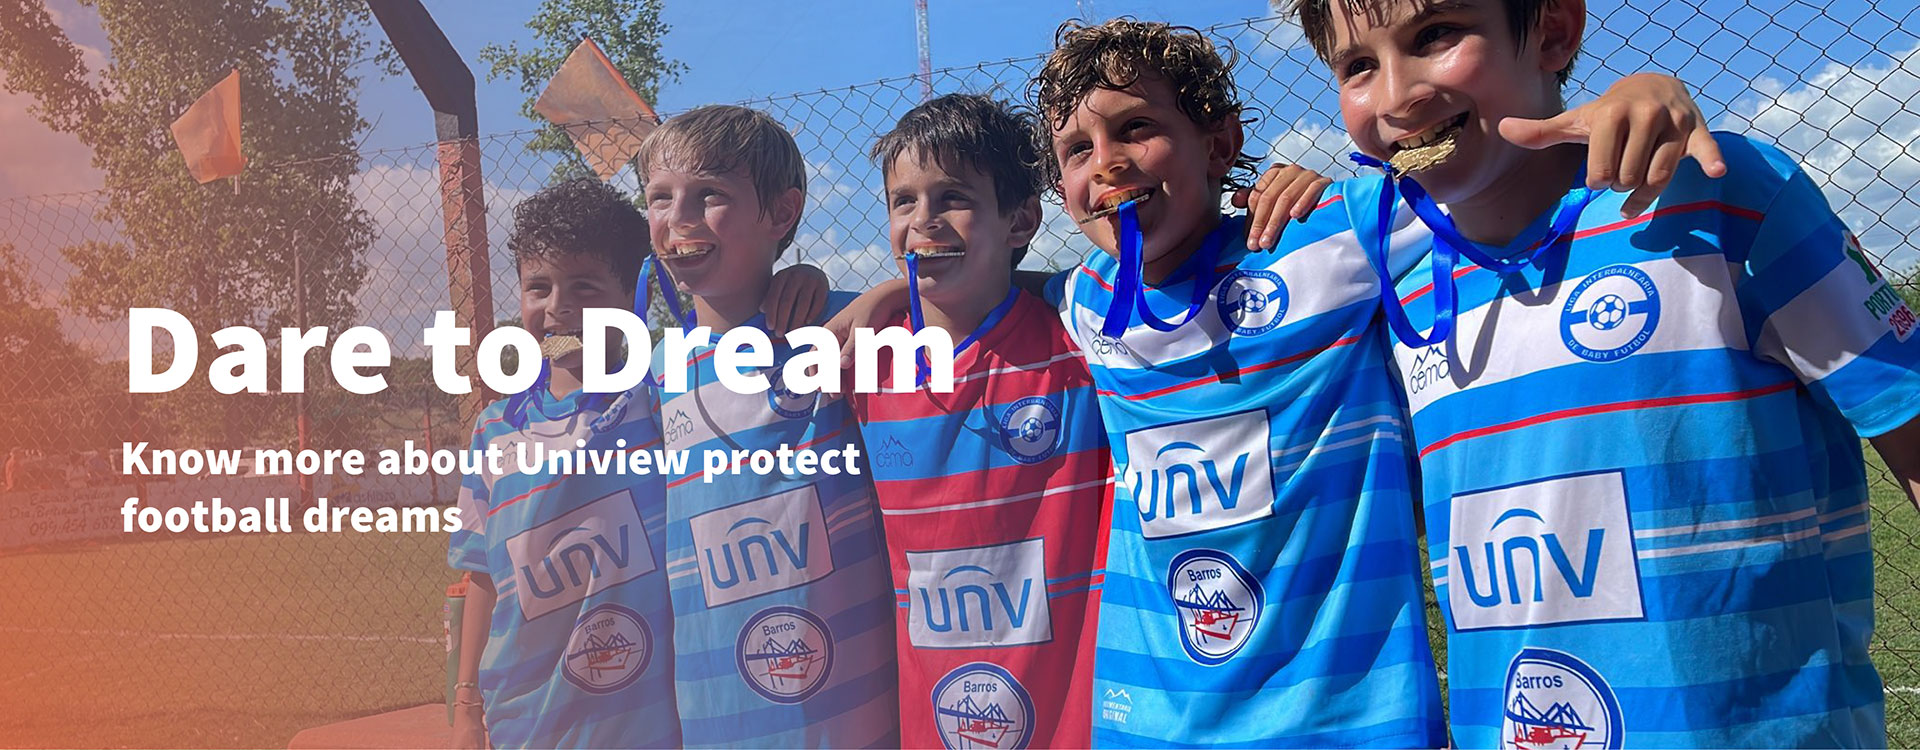 Dare to Dream: Know more about Uniview protecting football dreams